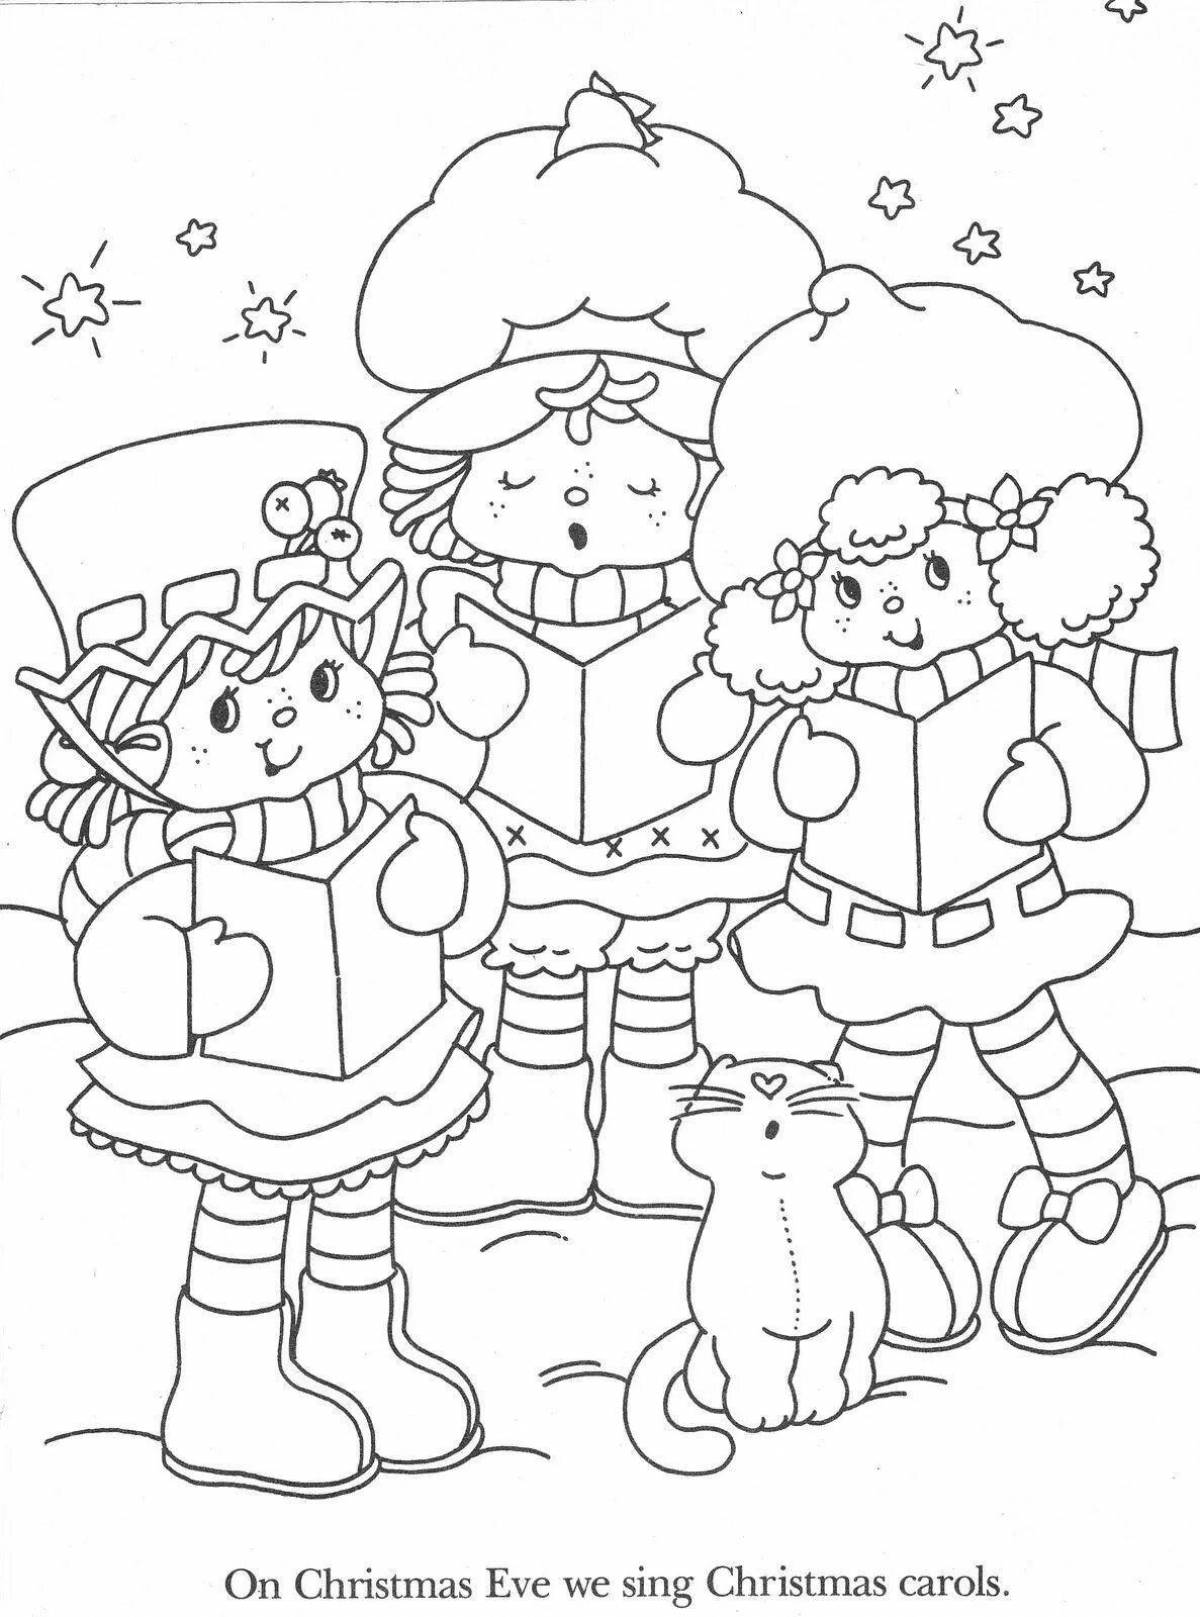 Adorable Christmas carol coloring pages for kids